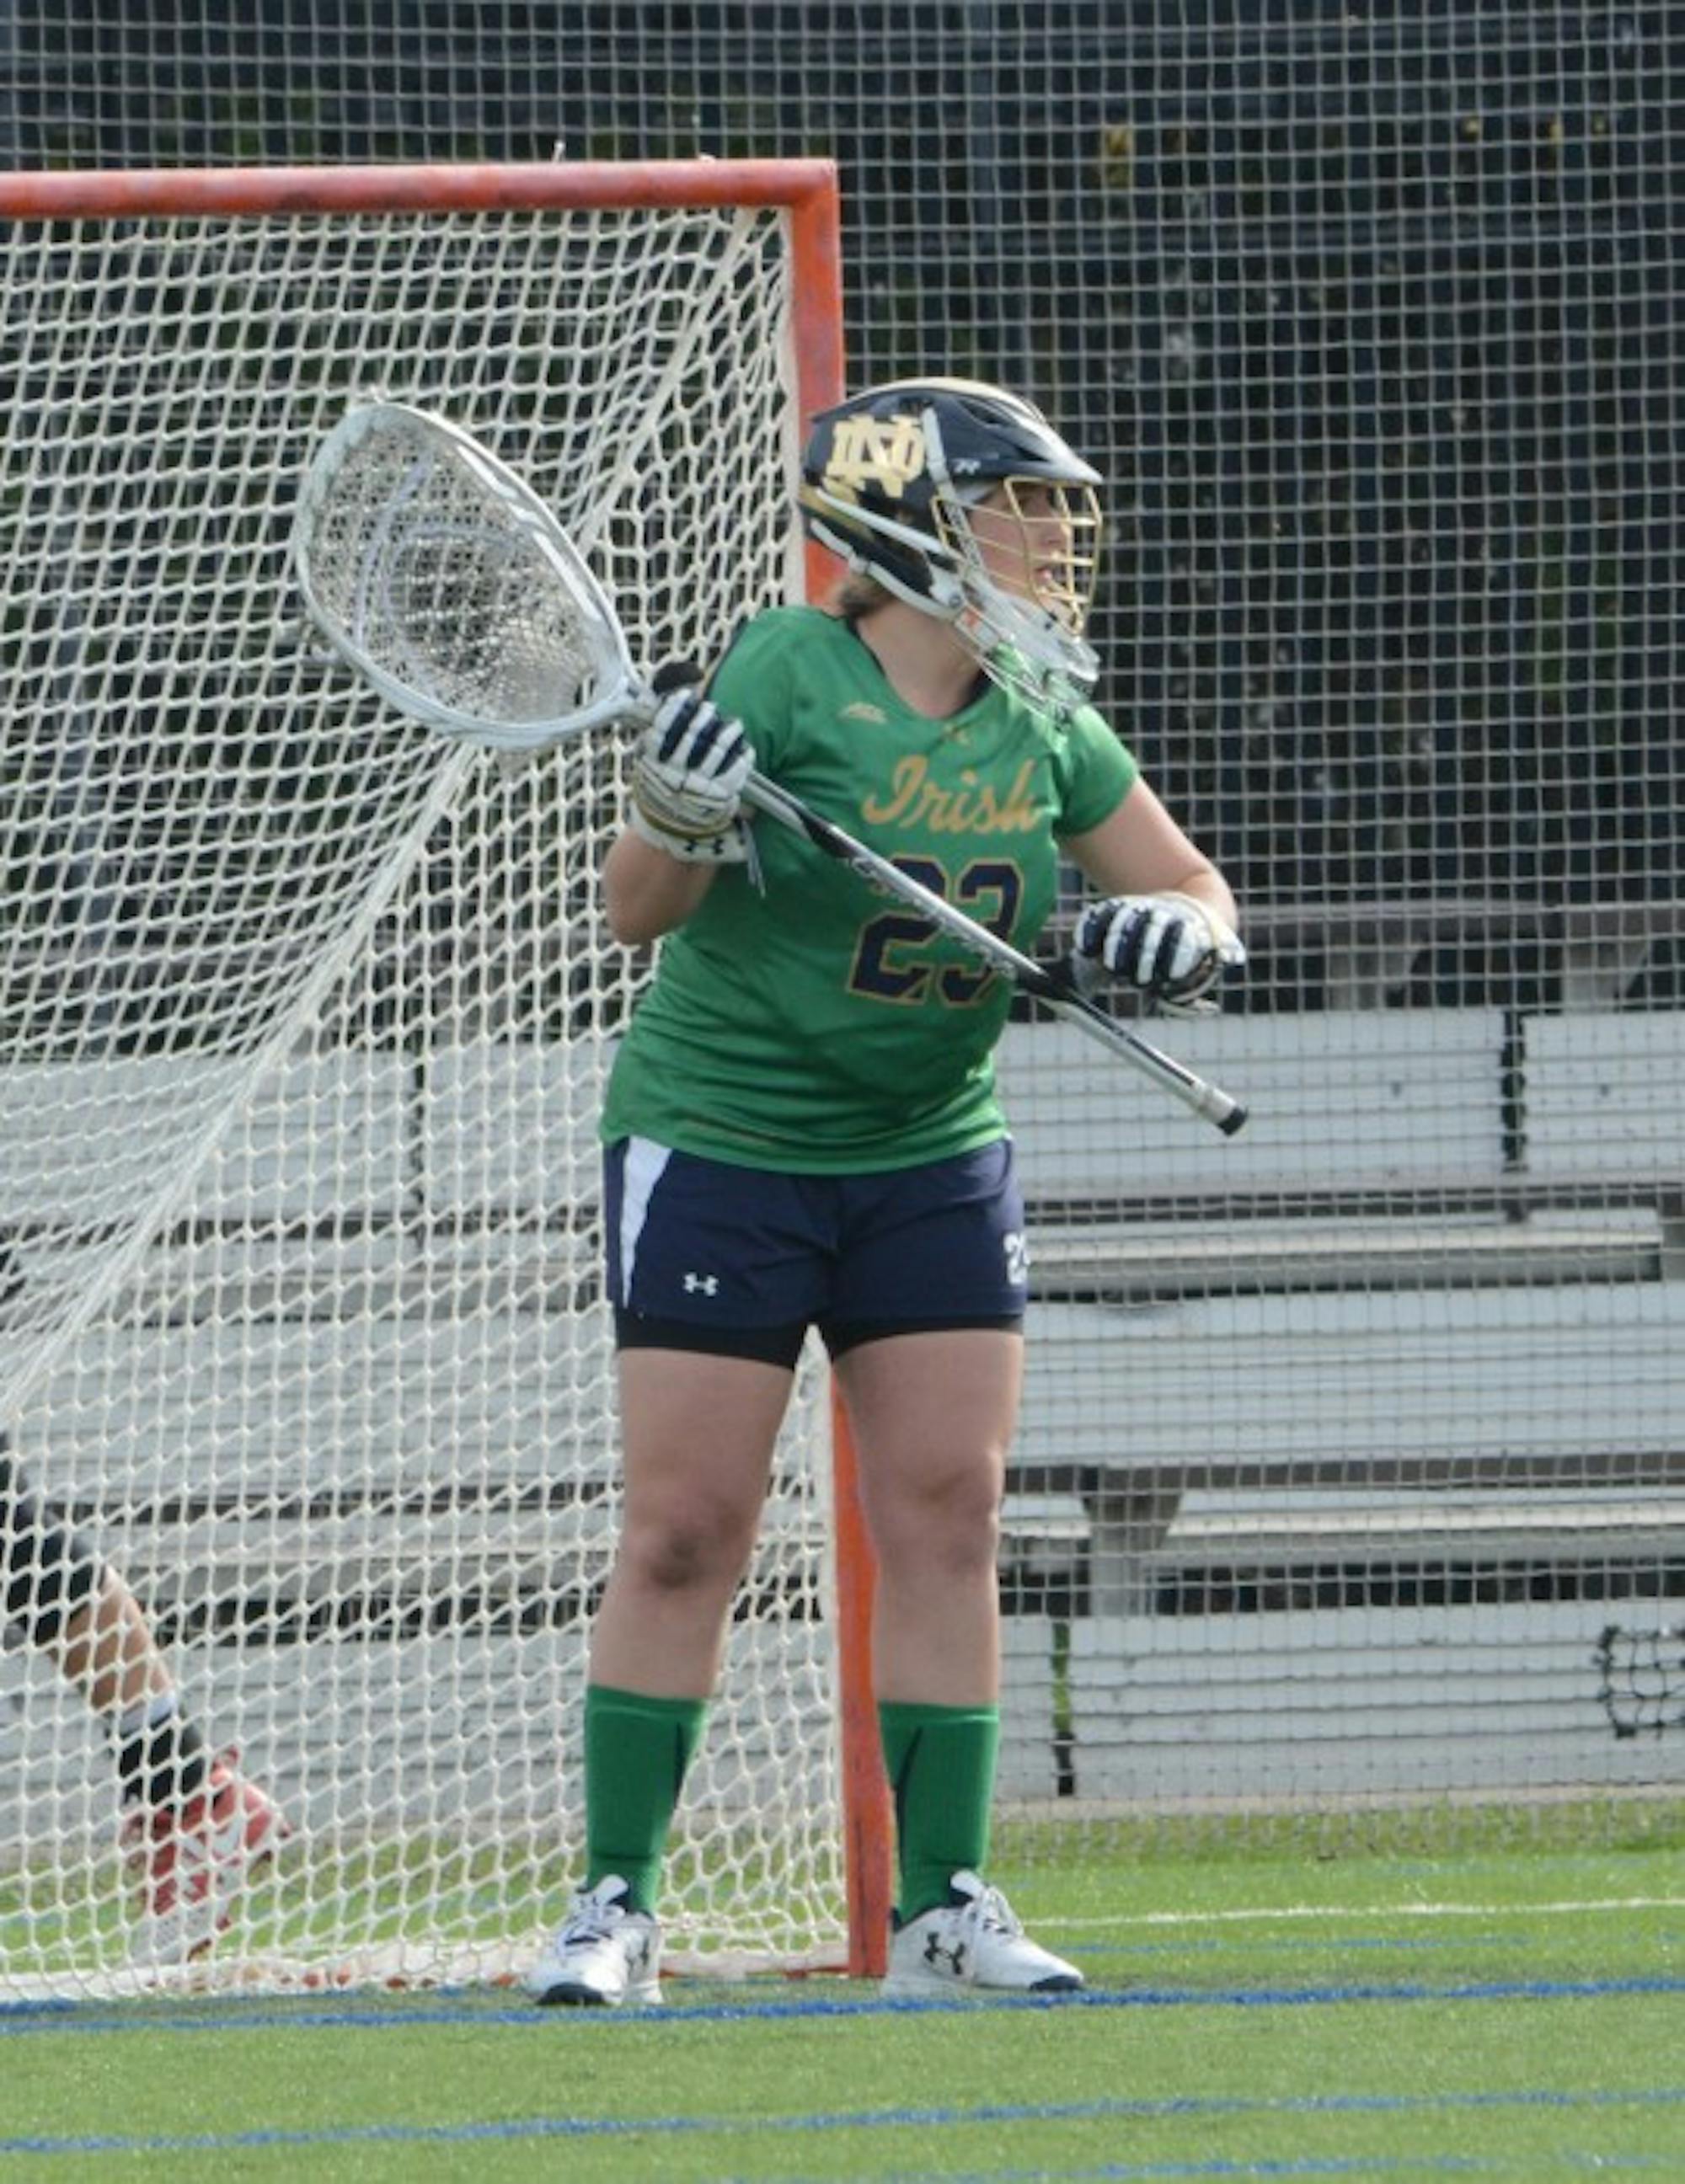 Irish sophomore goalie Samantha Giacolone guards the goal during Notre Dame’s 5-4 loss to USC on April 18 at Arlotta Stadium.